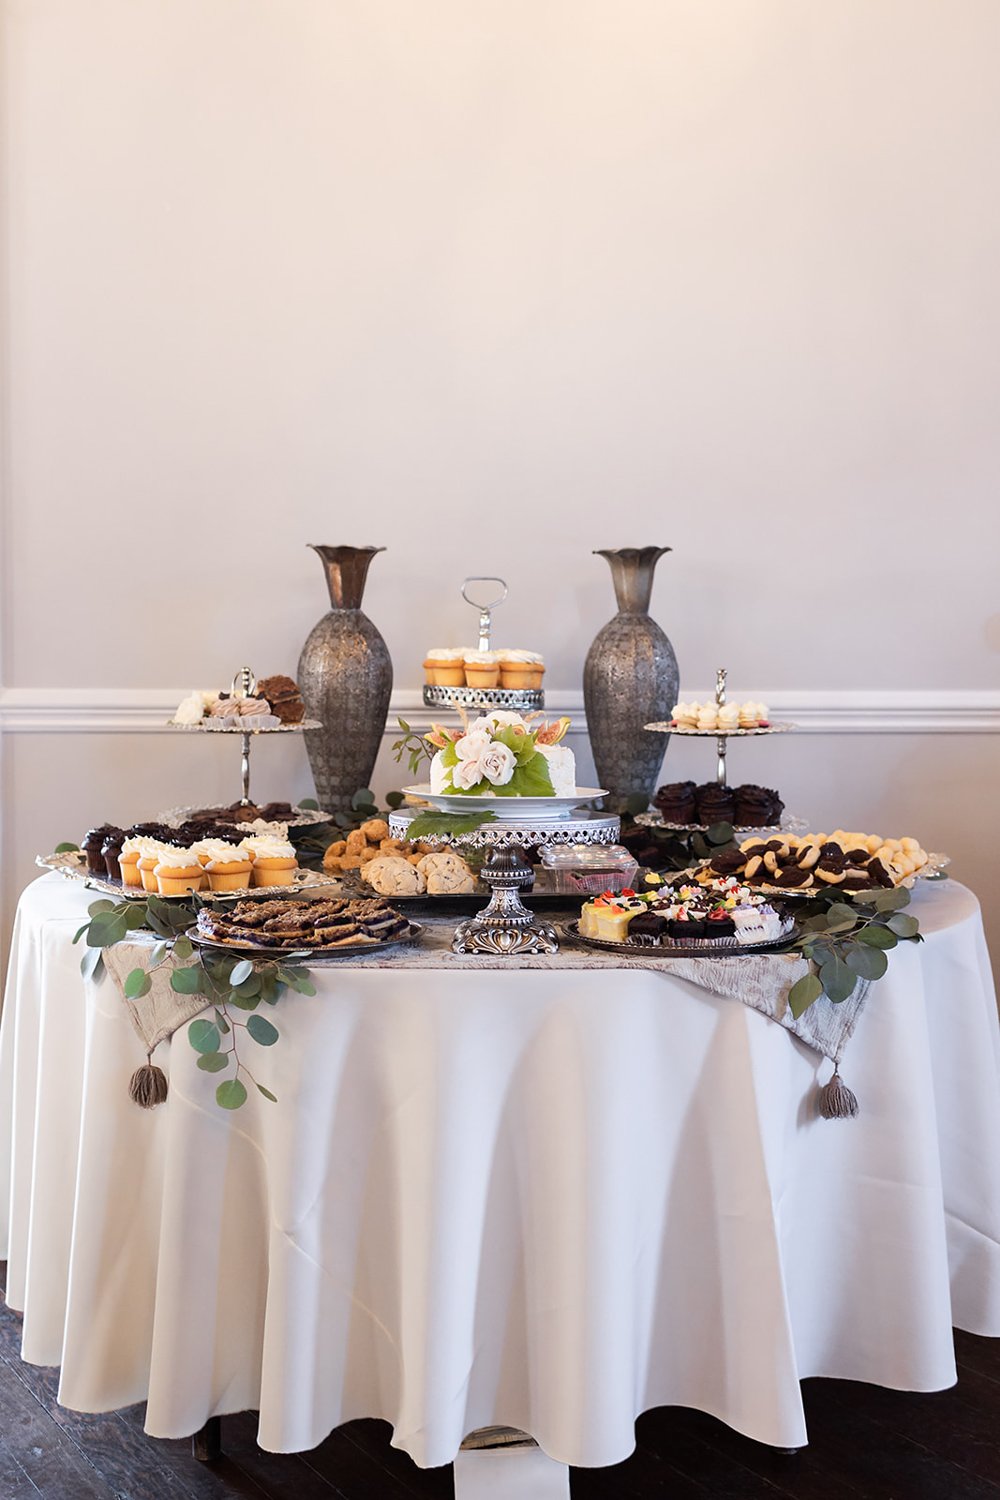 small dessert bar with cupcakes cookies and cakes at wedding 